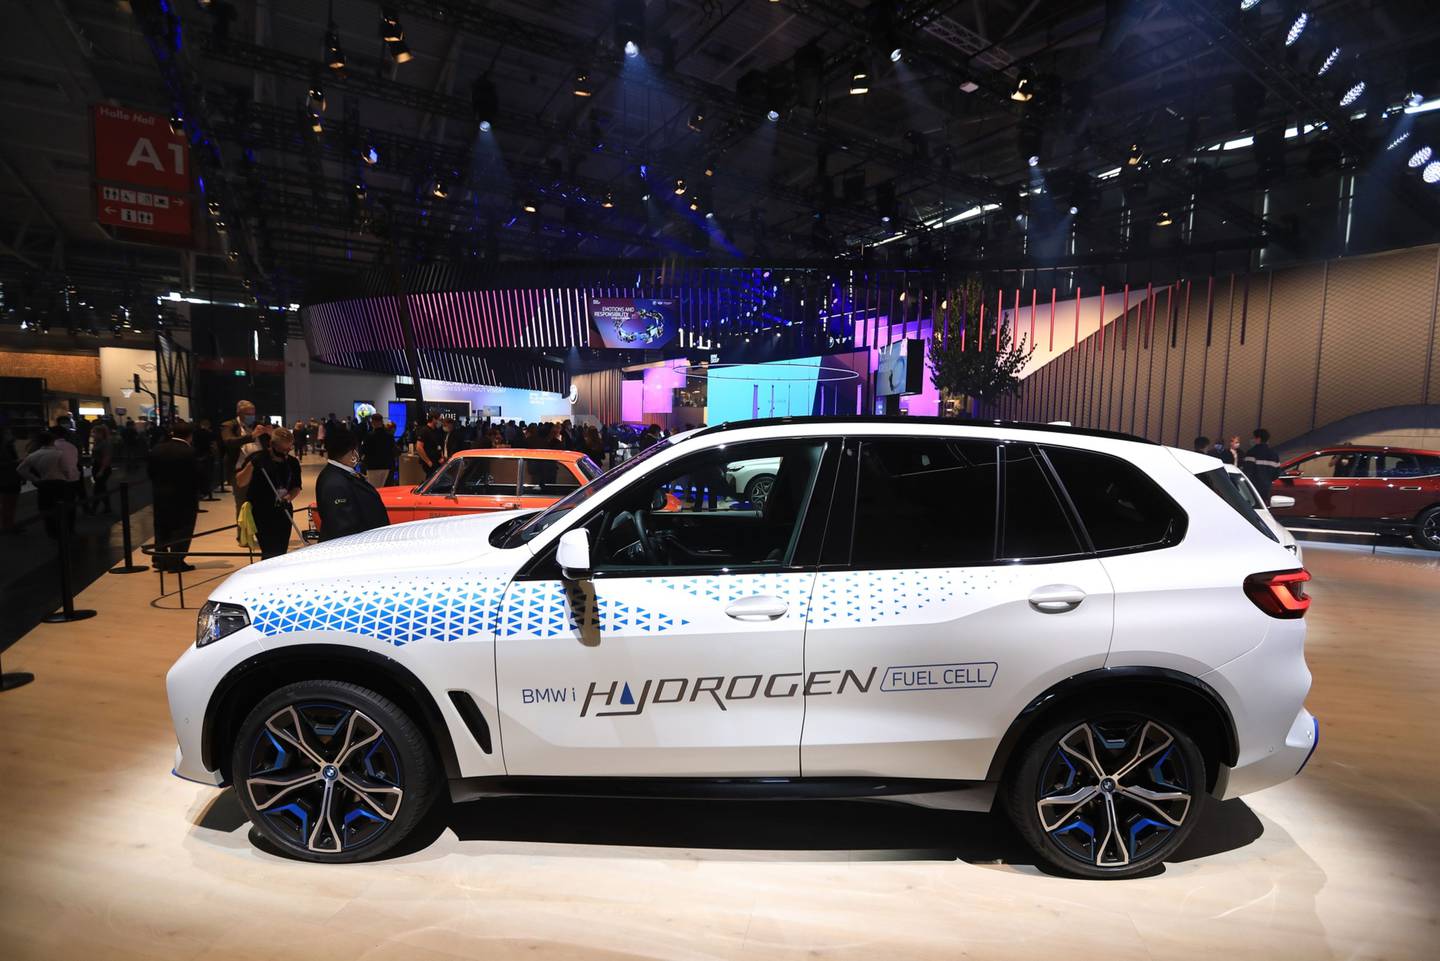 The BMW iX5 hydrogen powered vehicle on display at the IAA Munich Motor Show in Munich, Germany, on Monday, Sept. 6, 2021. The IAA, taking place in Munich for the first time, is the first in-person major European car show since the Coronavirus pandemic started. Photographer: Krisztian Bocsi/Bloombergdfd